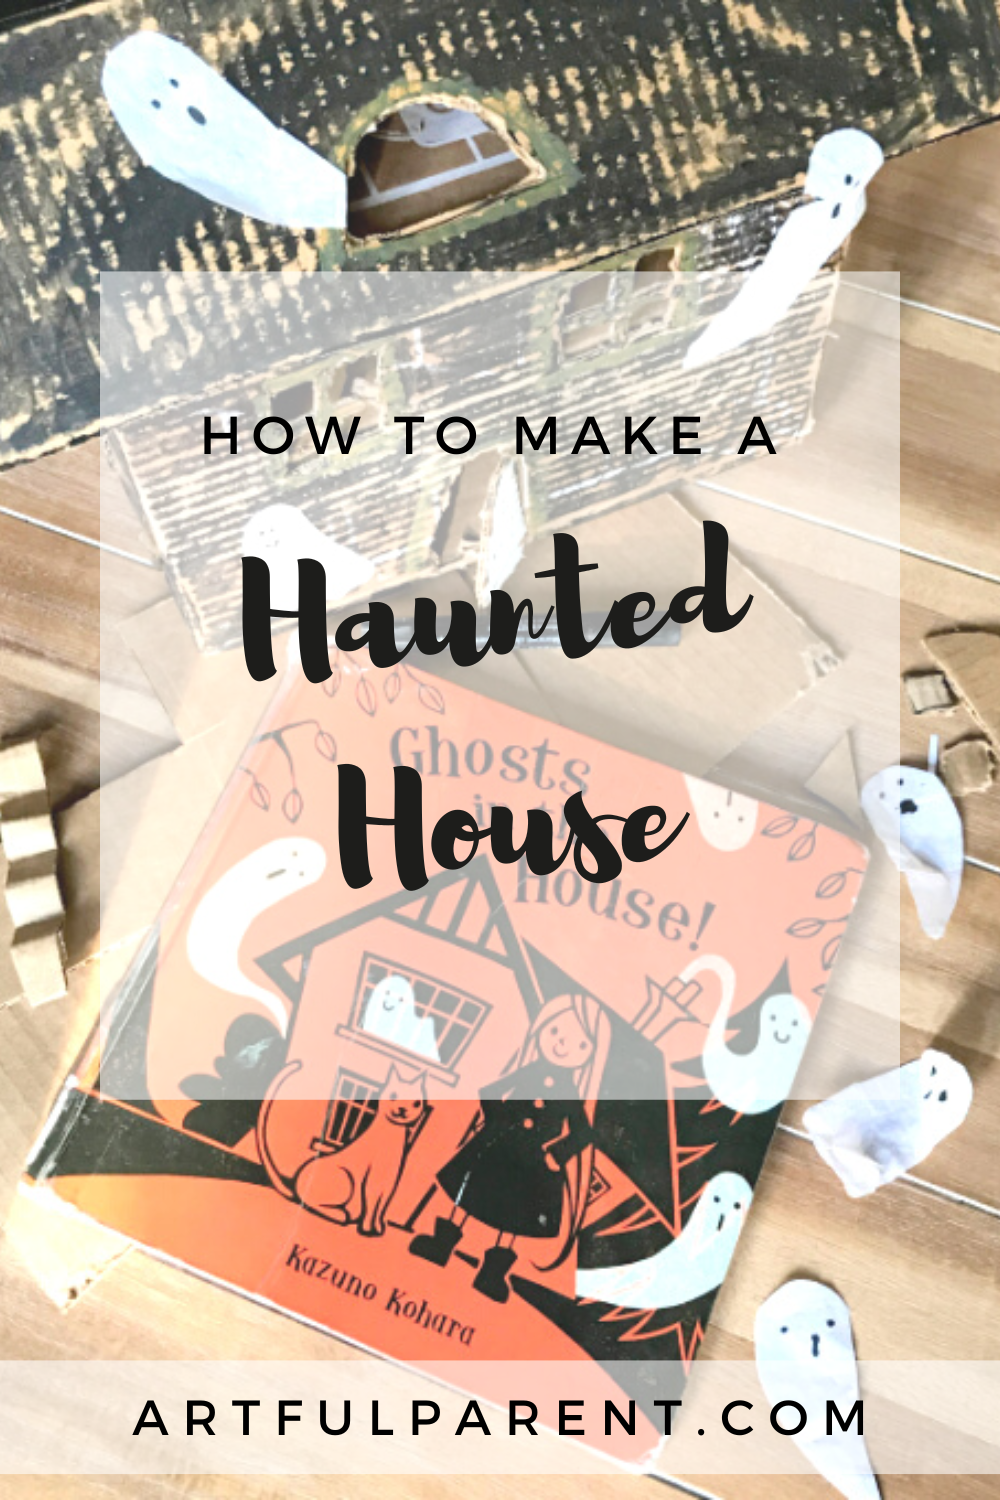 How to Make a Cardboard Haunted House